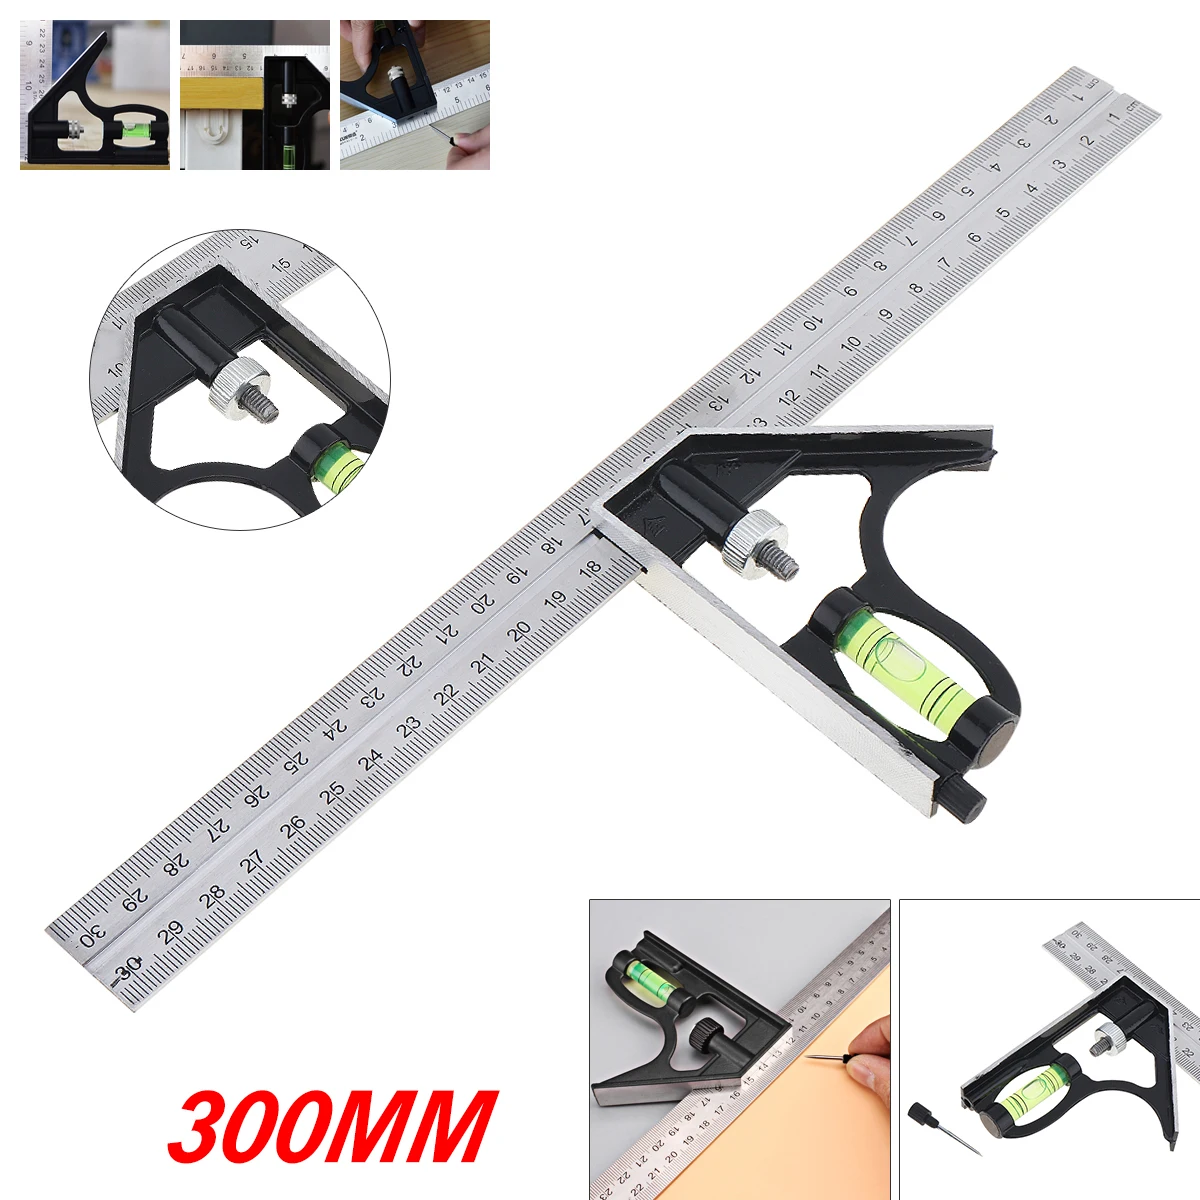 

12 Inch 300mm Adjustable Level Rulers Combination Angle Ruler 45 / 90 Degree With Bubble Level Multi-functional Measuring Tools